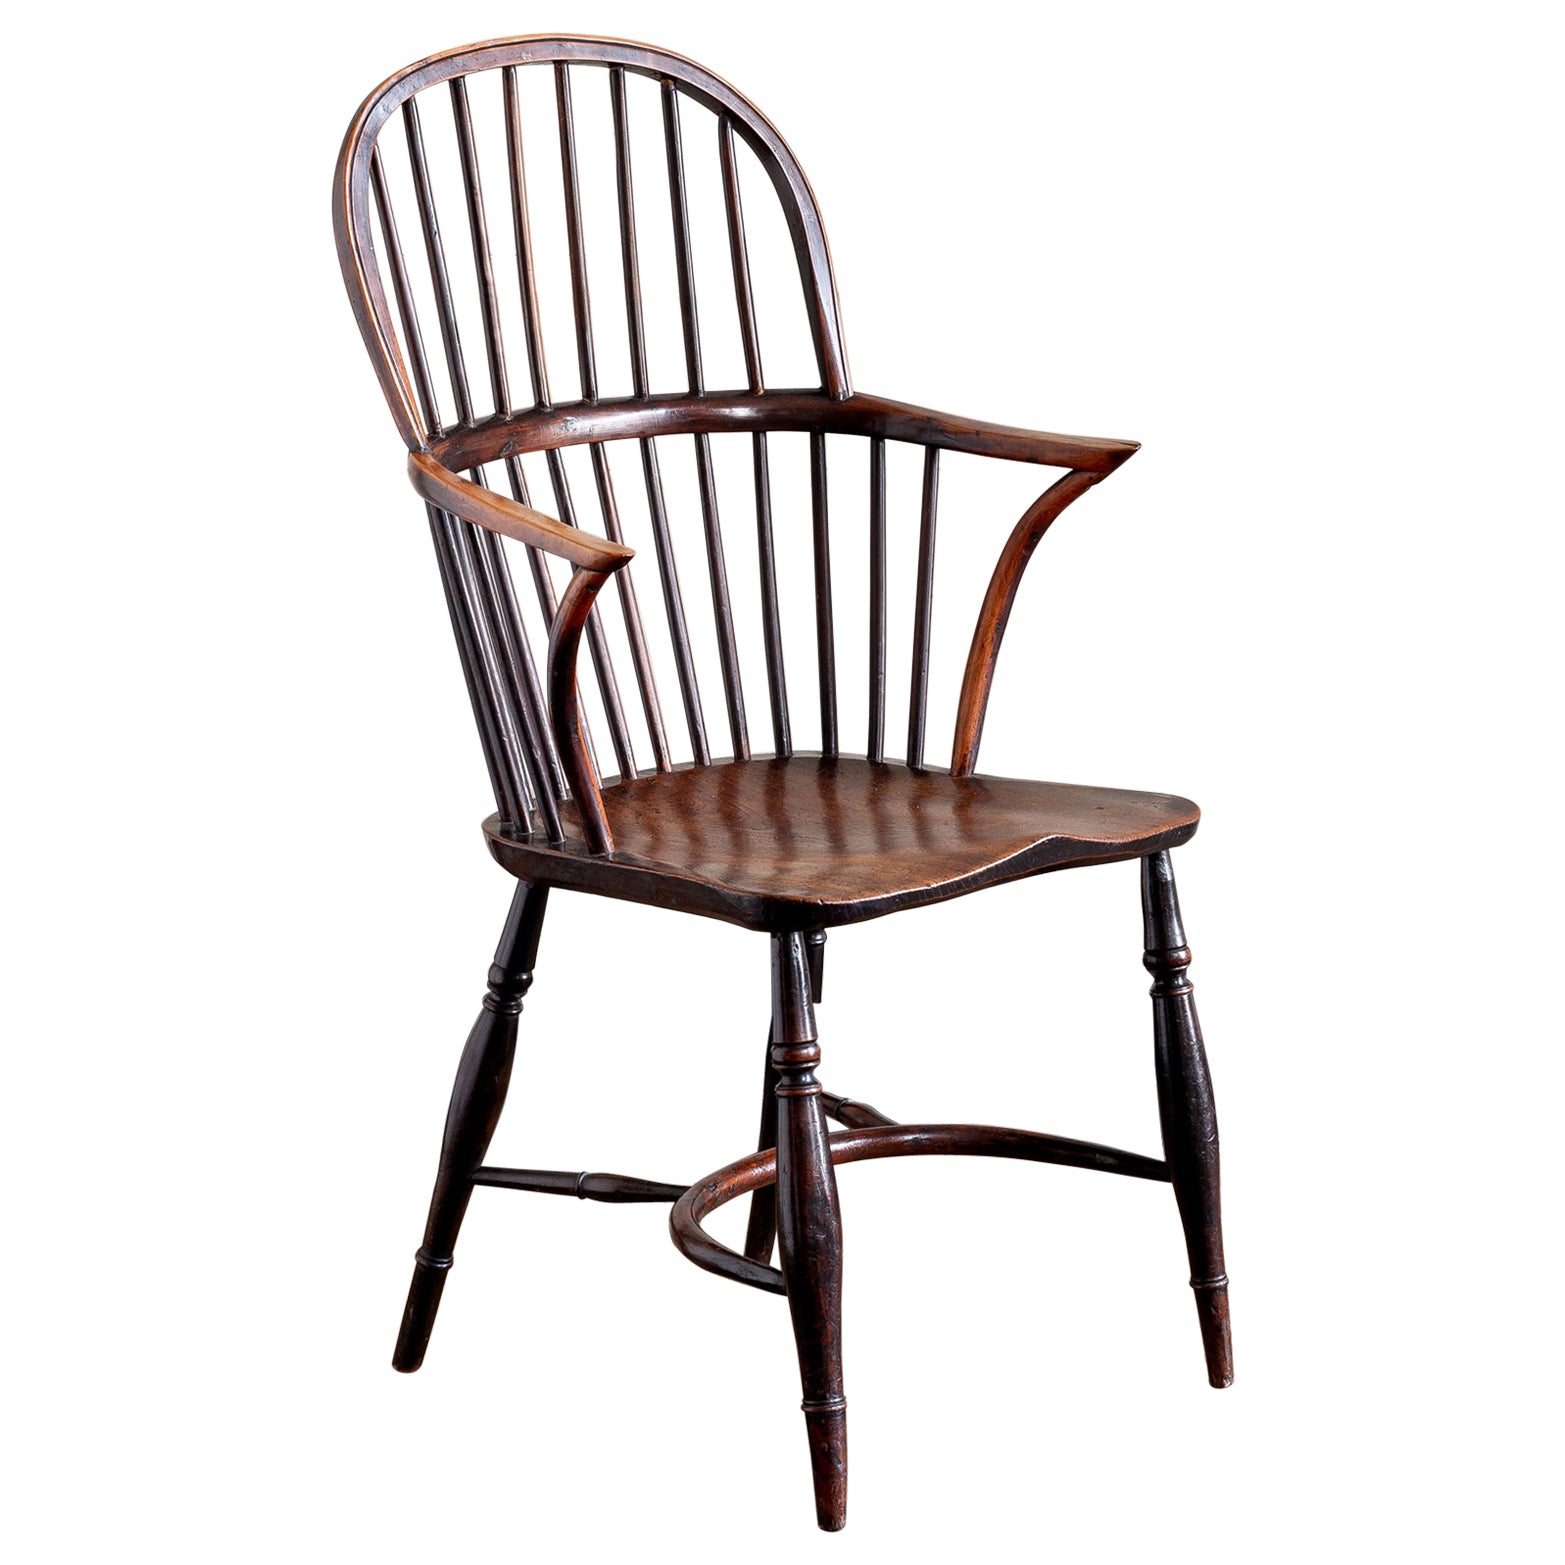 Early 19th Century English Thames Valley Windsor Armchair